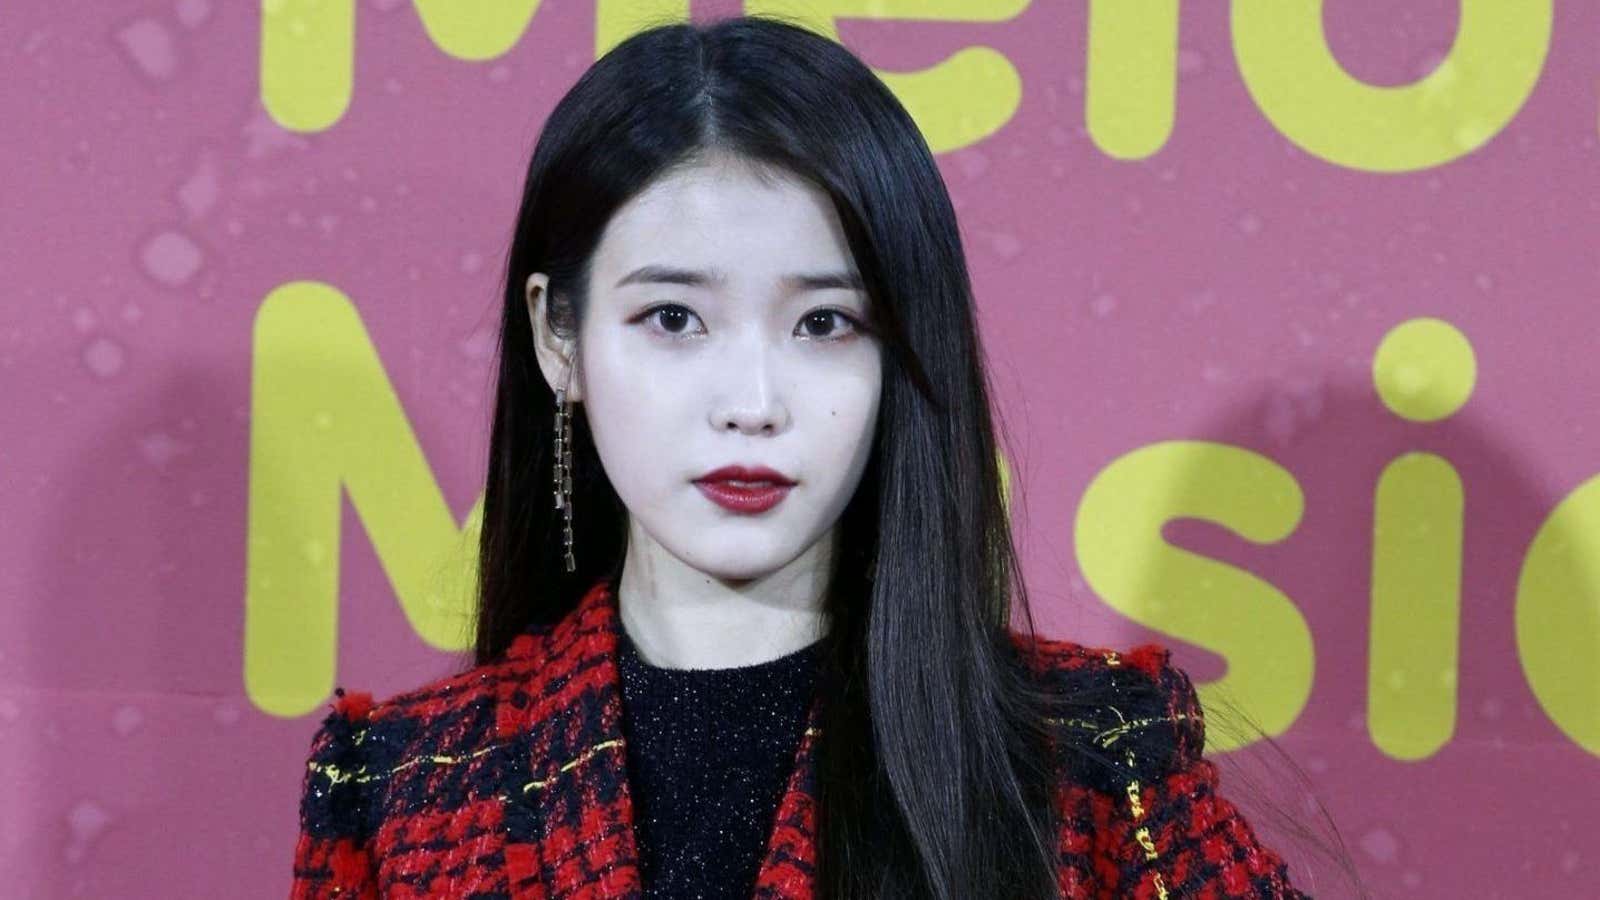 IU has dominated Korean pop charts for a decade